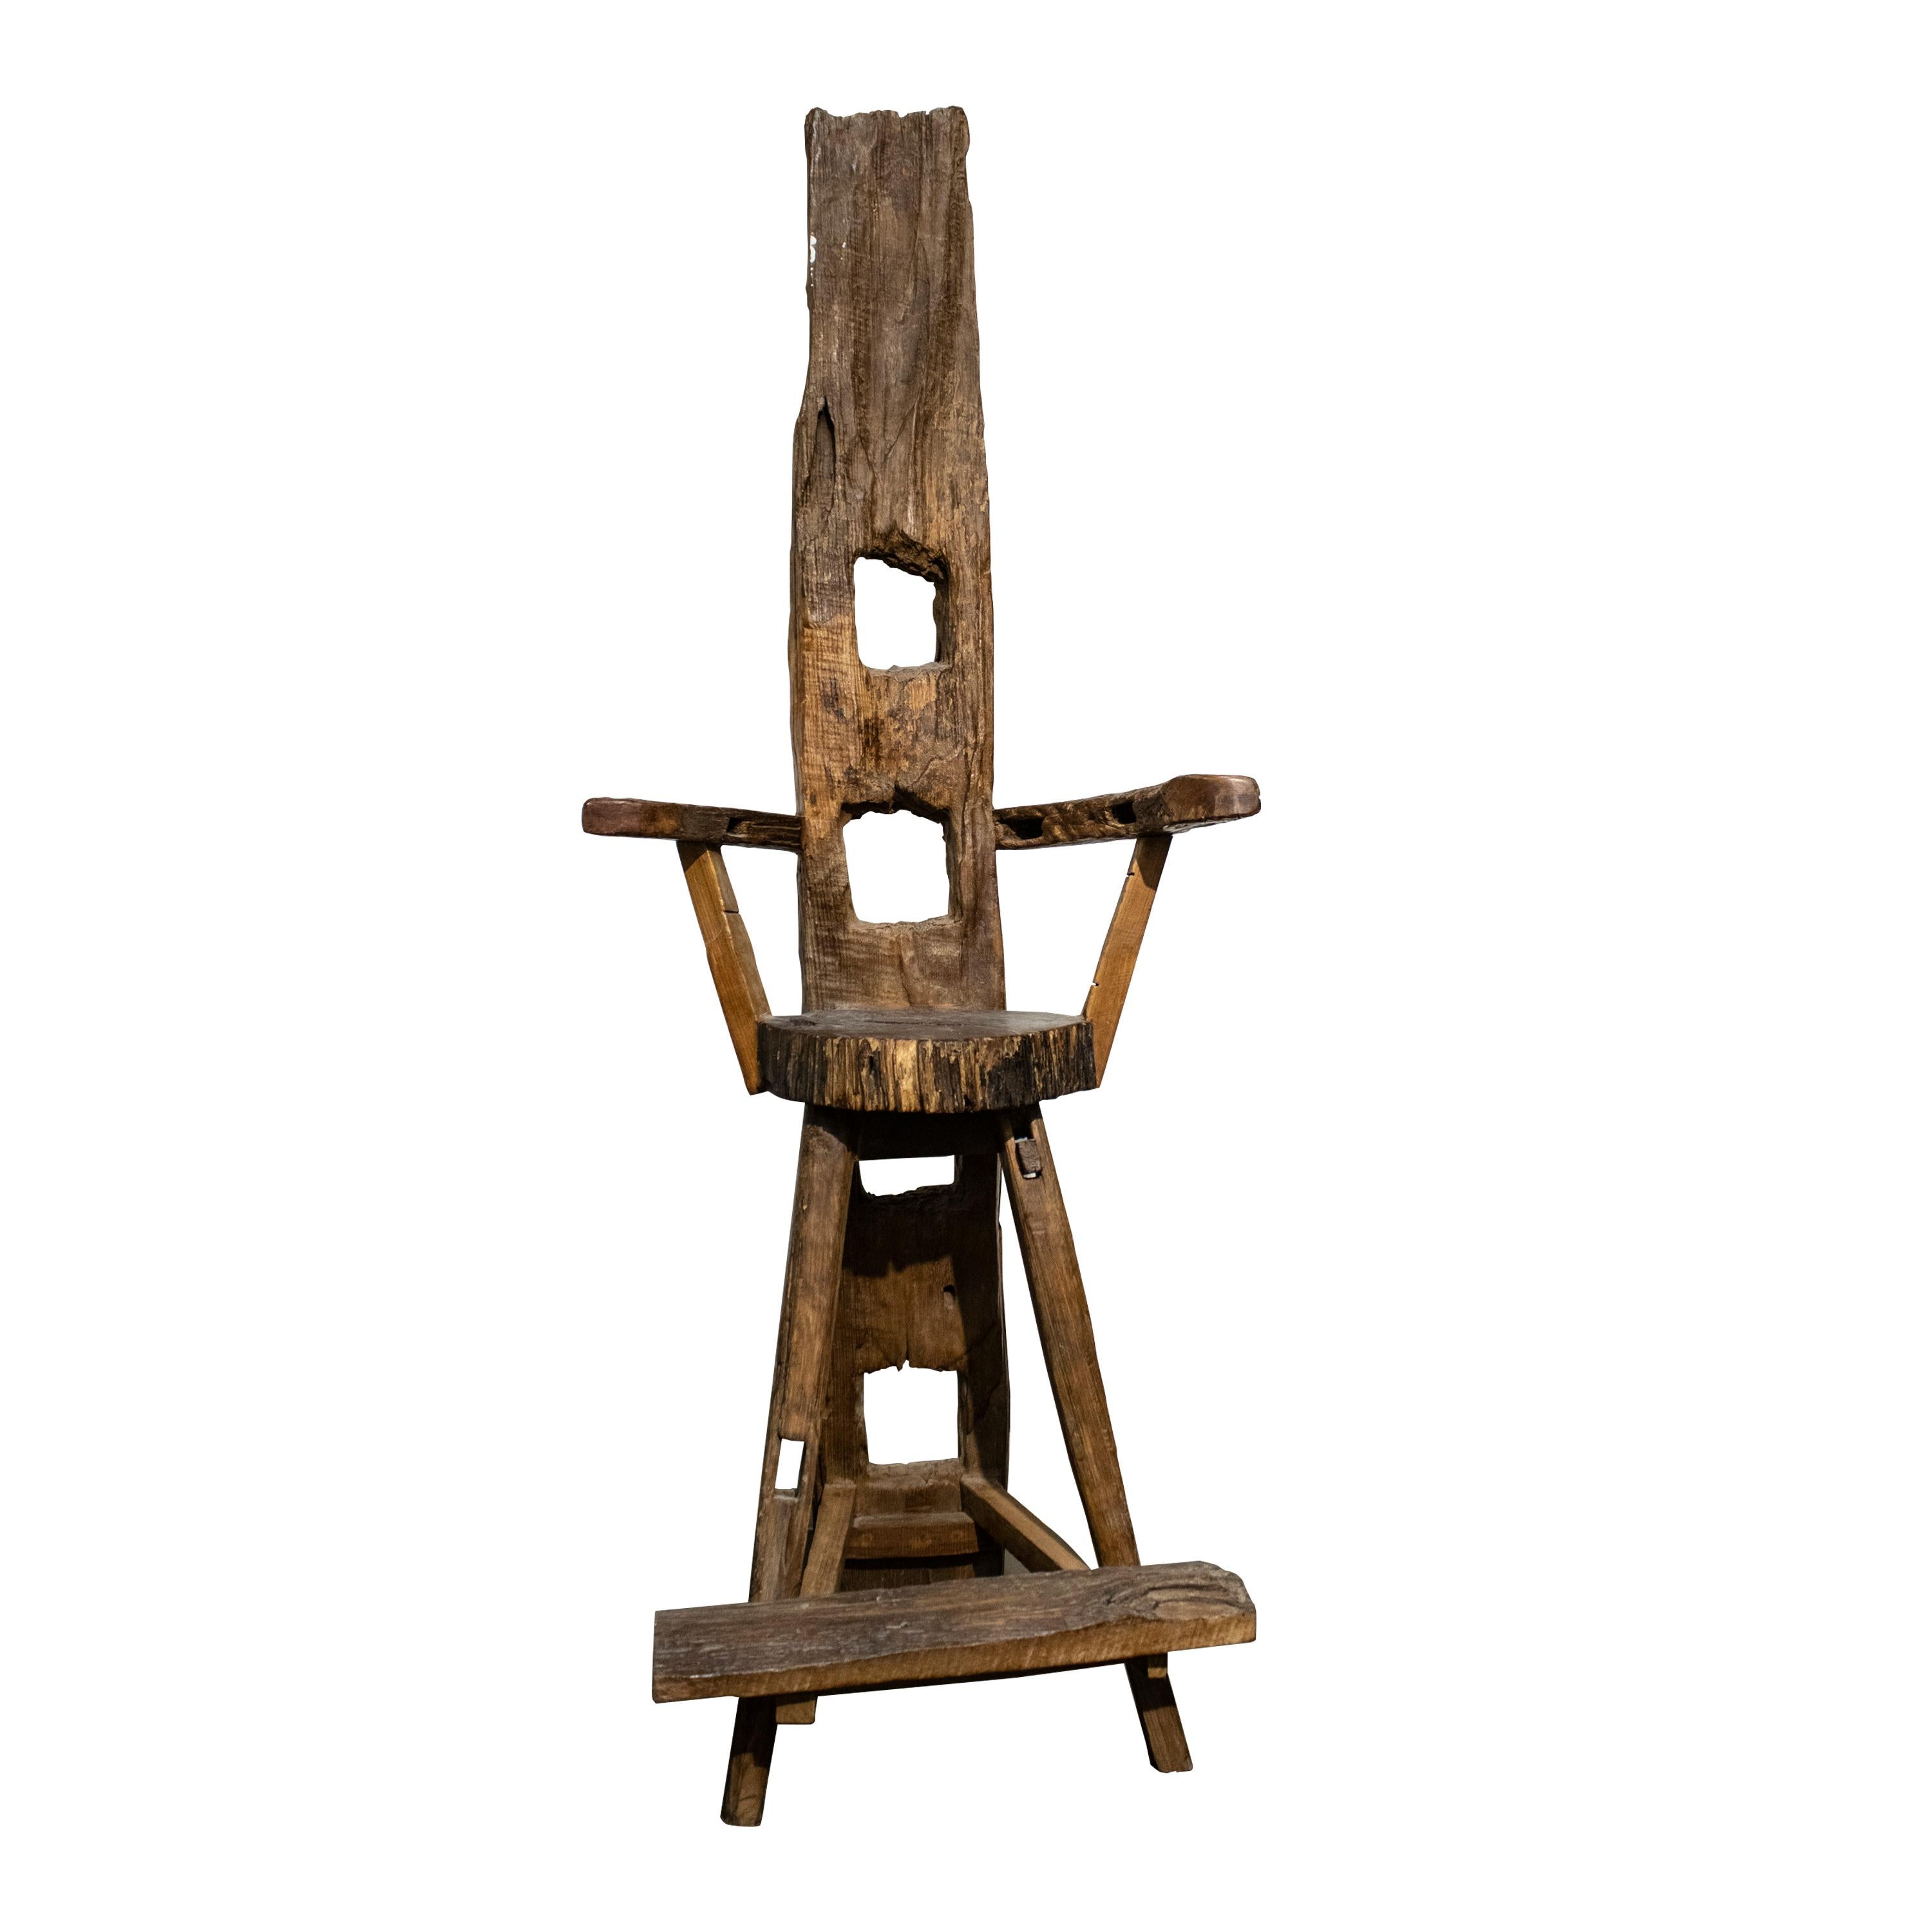 Sculptural walnut and olive wood chair with curved armrest.
Hand-crafted work made with the remains of old farm implements in Germany in the 1920s.
It consists of a specially high backrest with rectangular holes and engraving details.